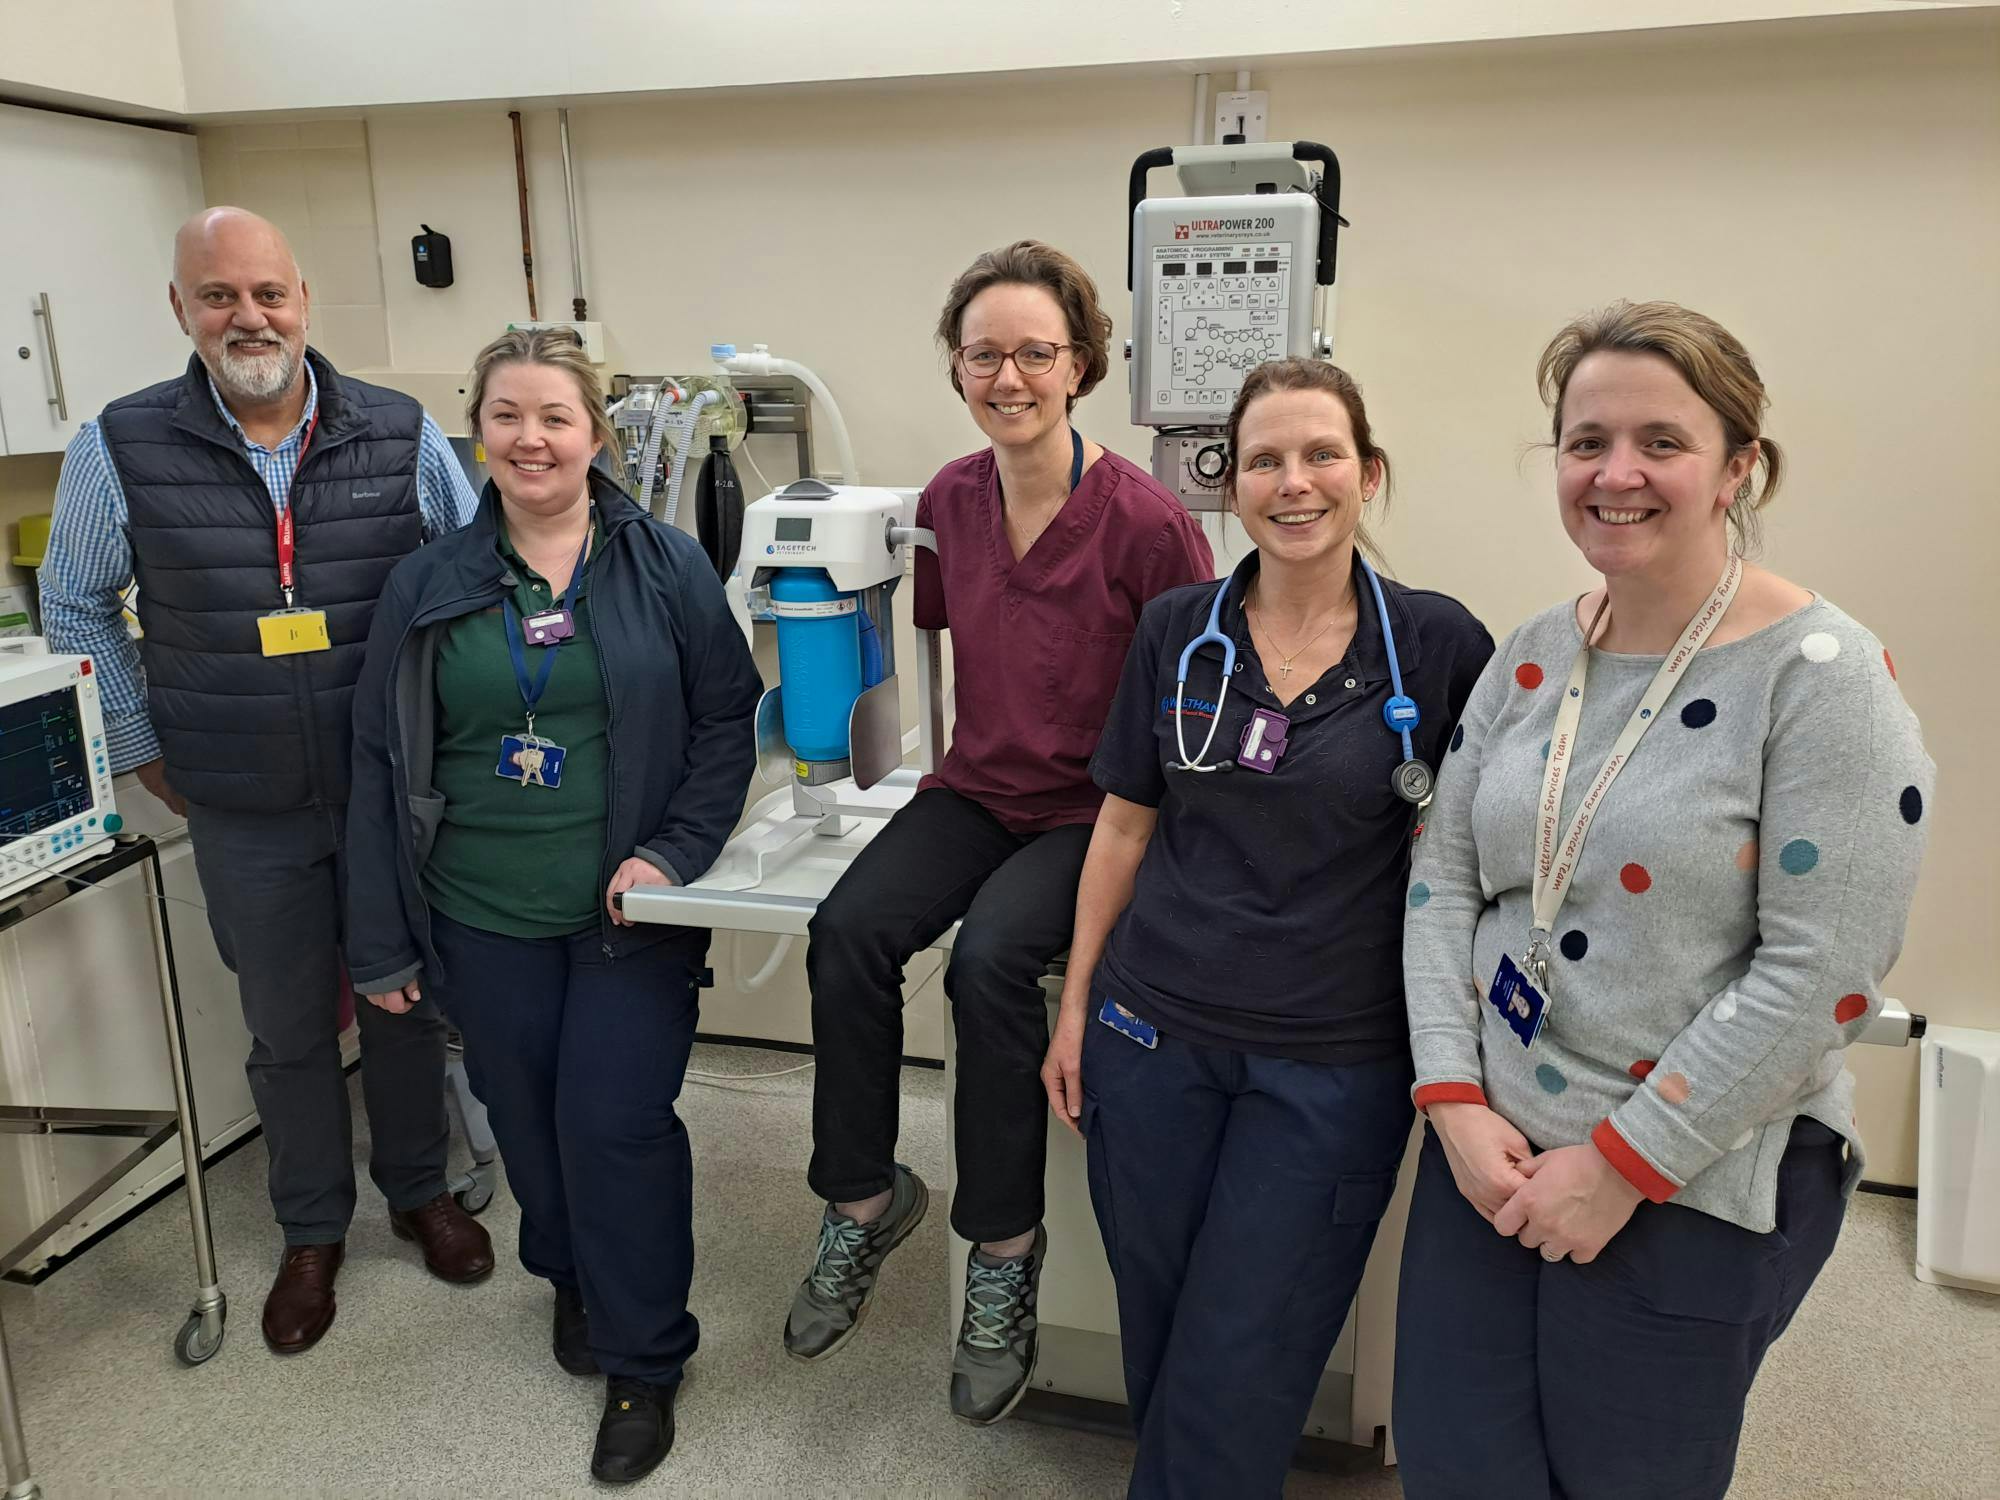 Ellie West, RCVS and EBVS European specialist in veterinary anesthesia and analgesia and SageTech Waltham Team (Image courtesy of Mars Veterinary Health)